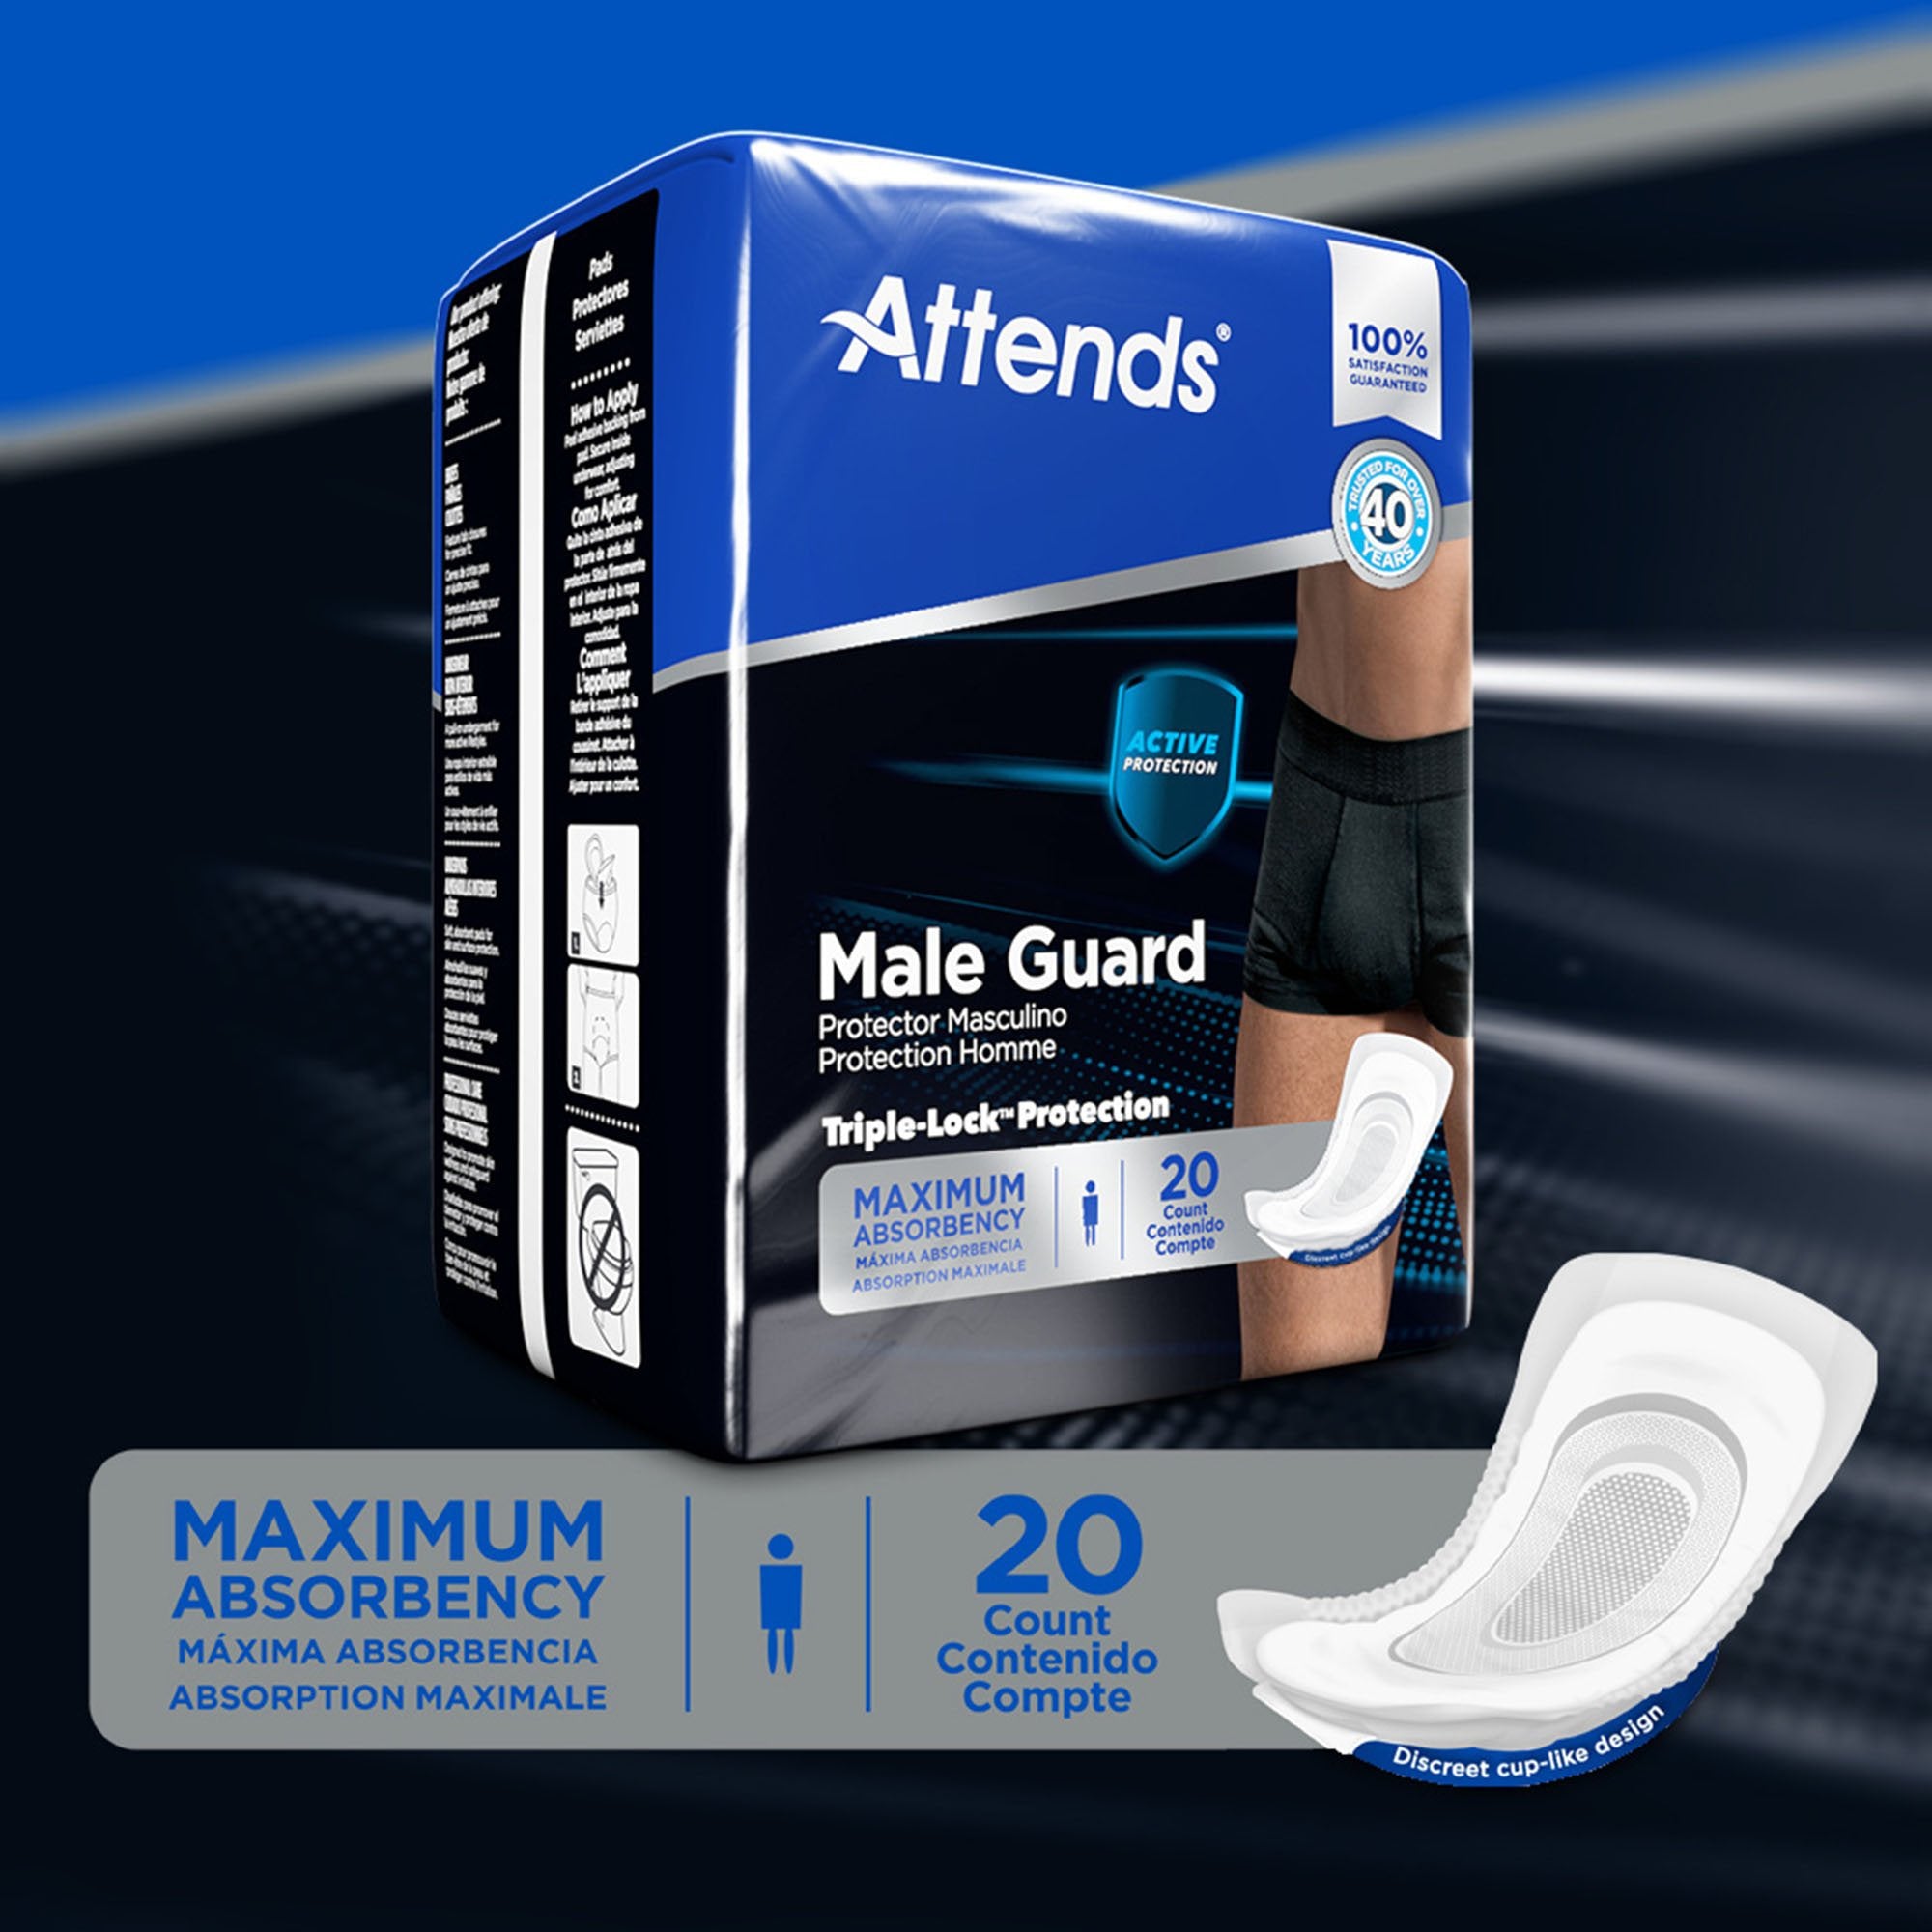 Bladder Control Pad Attends Discreet Male Guard 12-1/2 Inch Length Light Absorbency Polymer Core One Size Fits Most